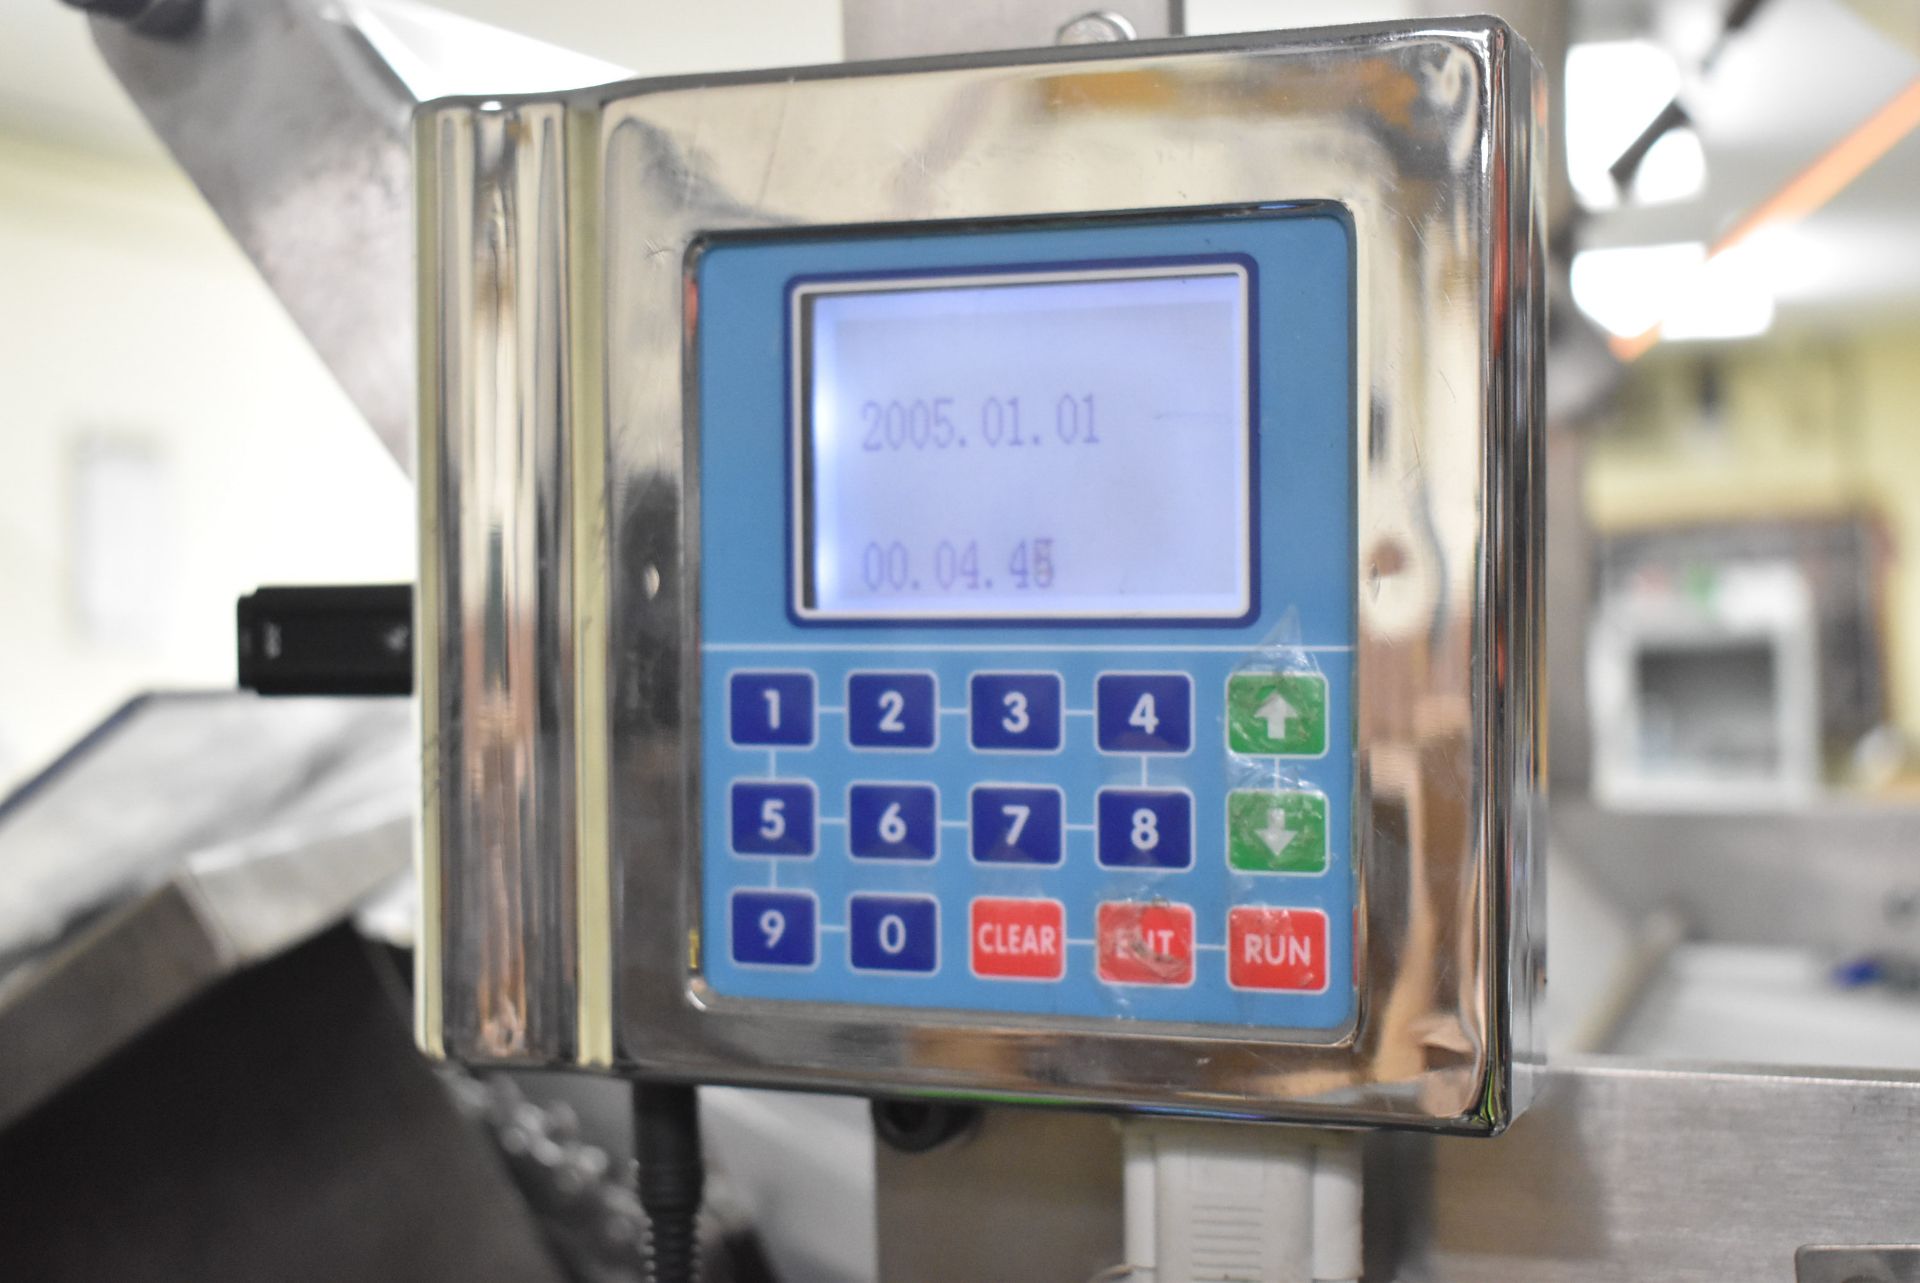 MFG. UNKNOWN STAINLESS STEEL AUTOMATIC BAGGING MACHINE WITH THINGET TOUCH SCREEN CONTROL, S/N: N/ - Image 6 of 9